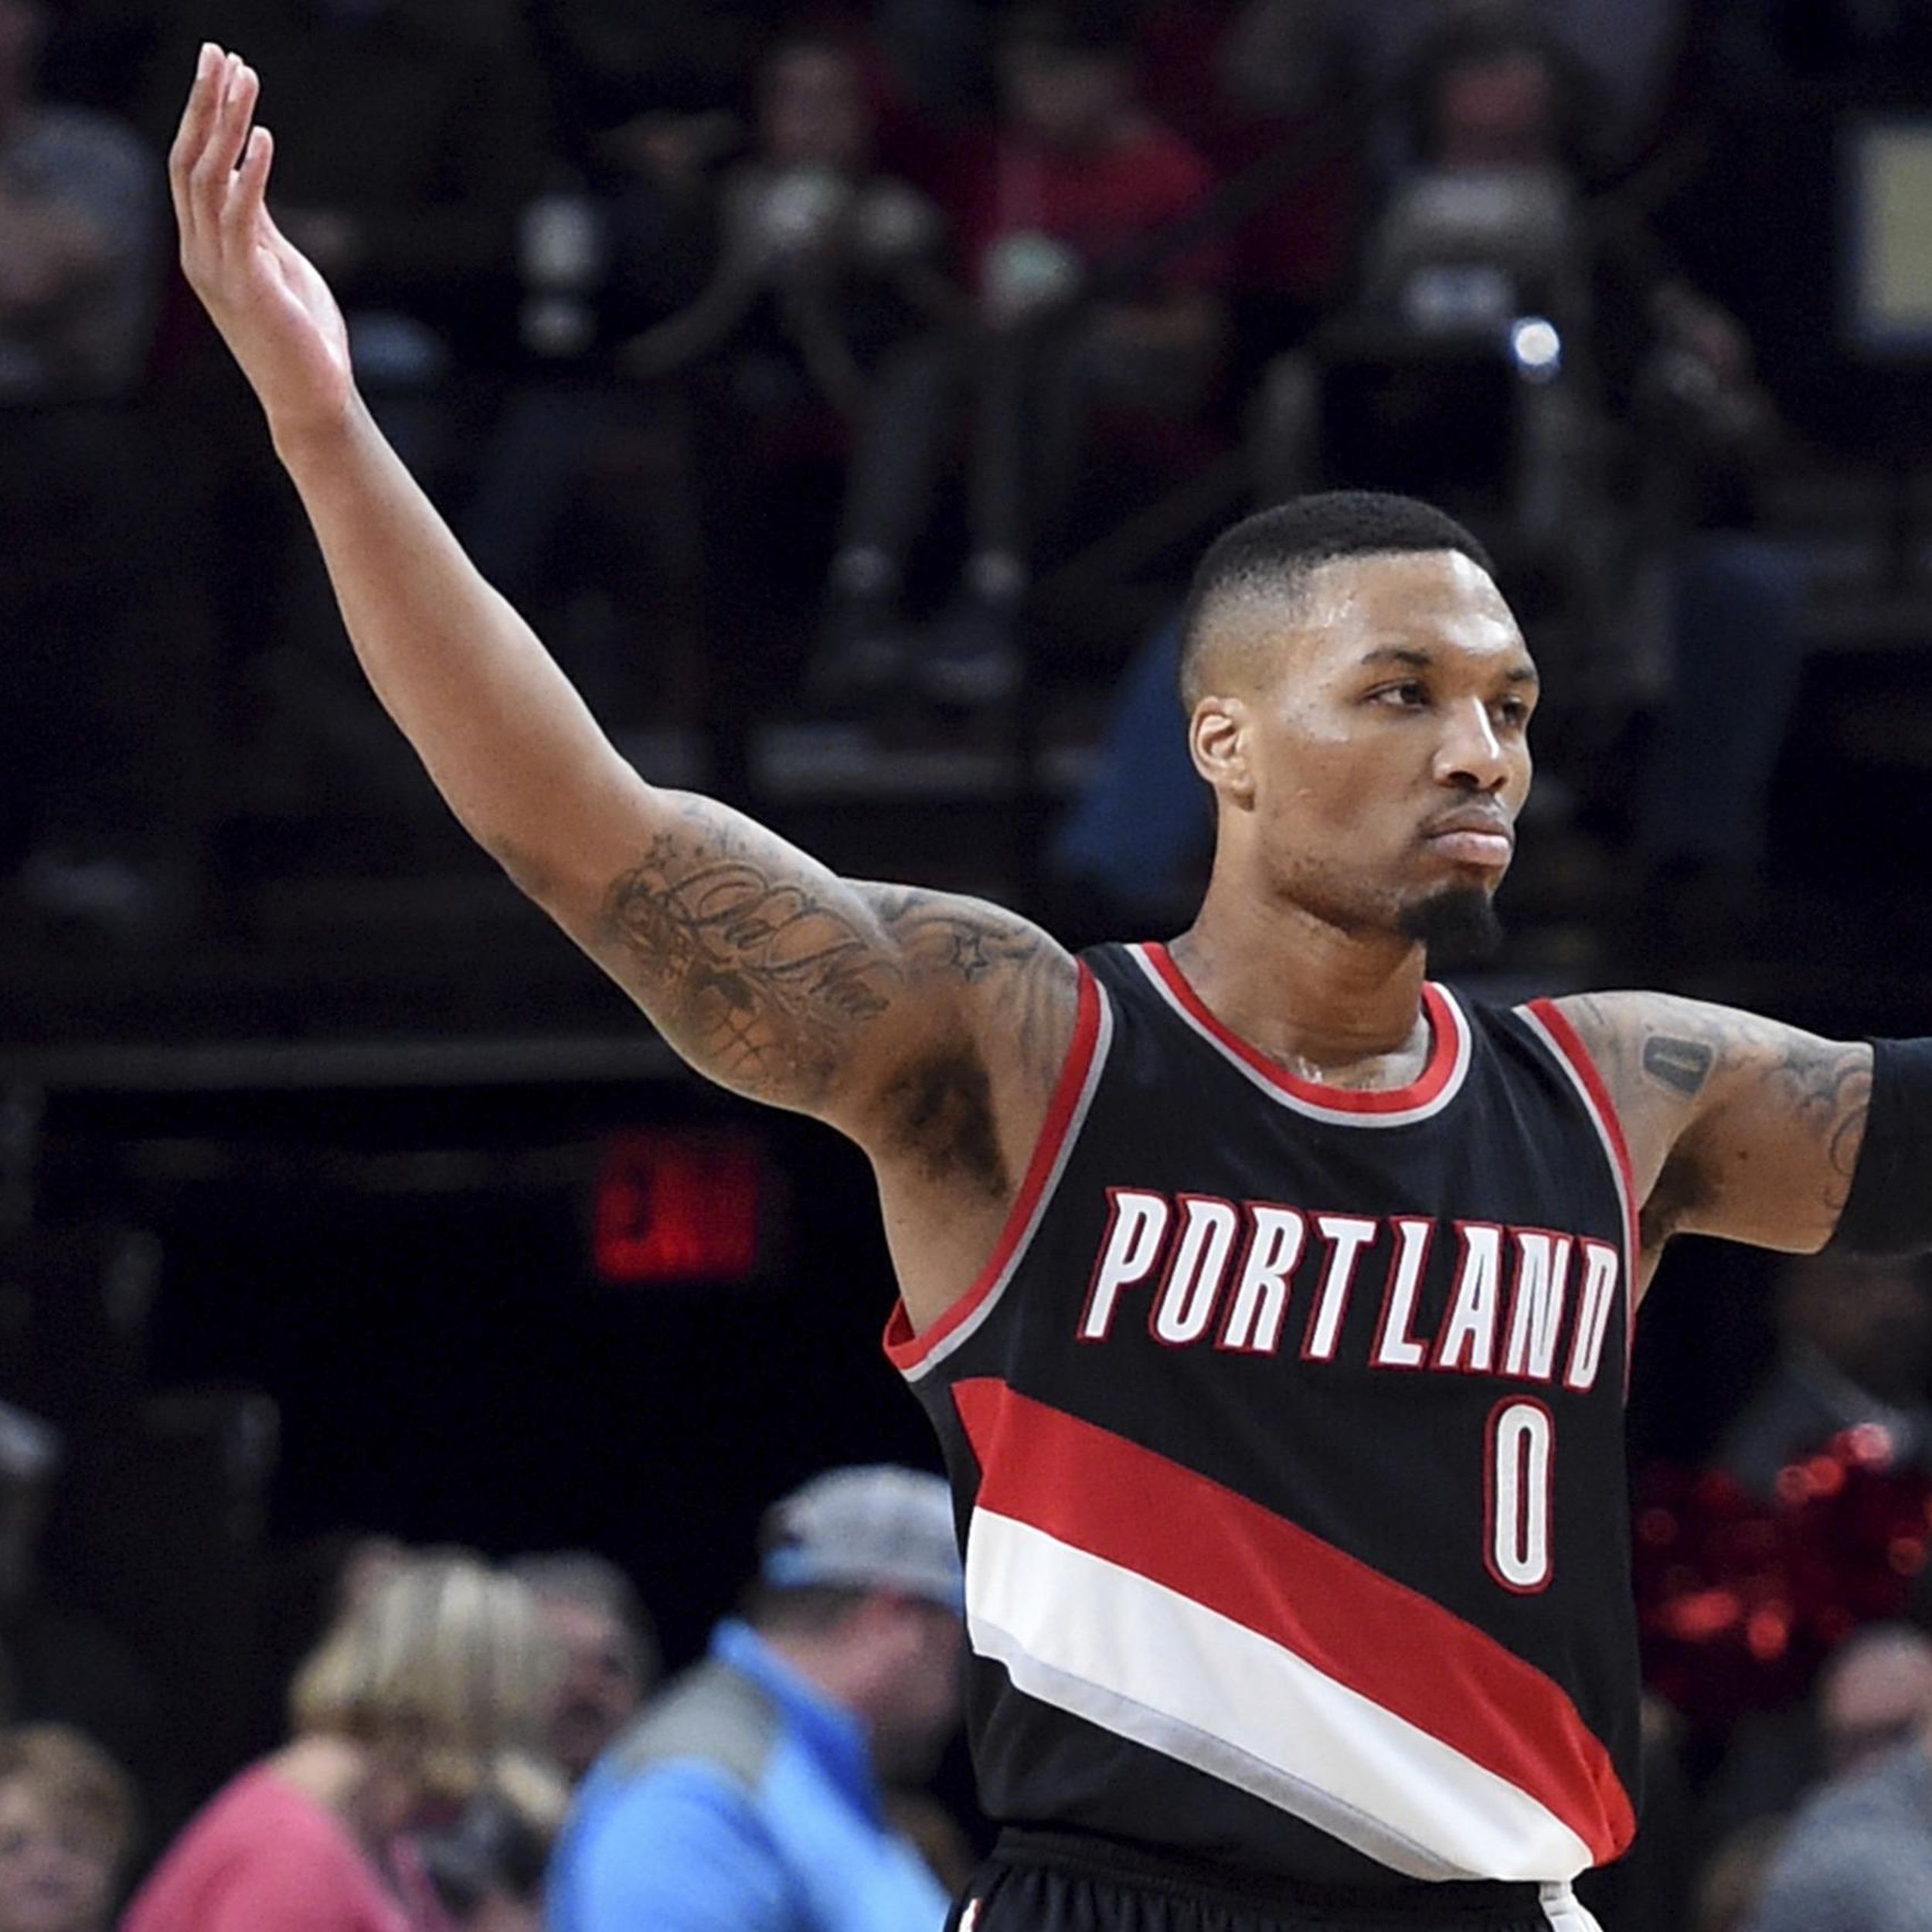 Awesome Artifacts Damian Lillard Portland Trail Blazers Jersey Signed with Proof by Awesome Artifact